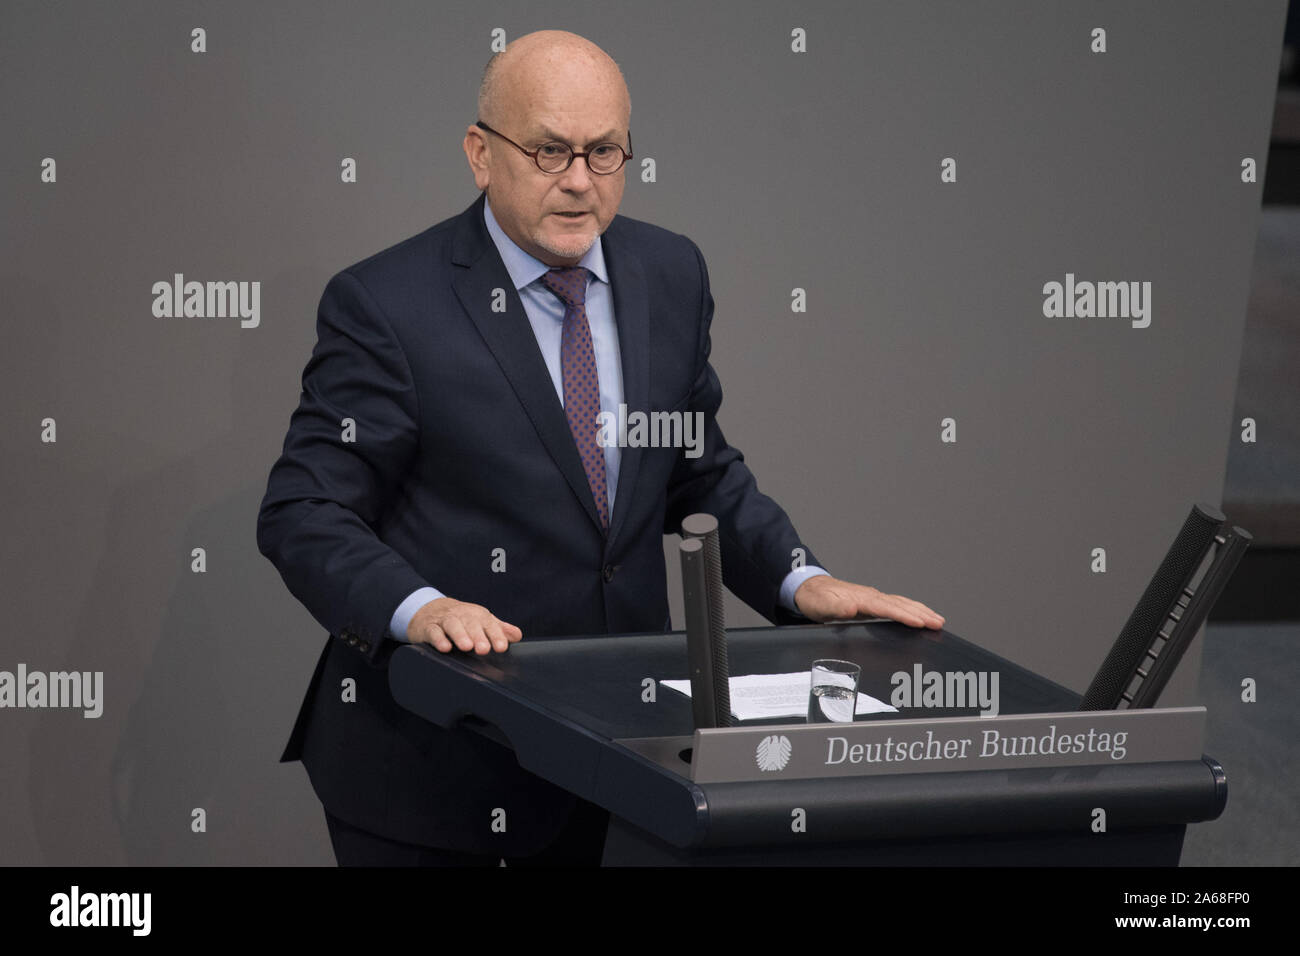 Berlin, Germany. 24th Oct, 2019. Manfred Grund (CDU/CSU) speaks in the plenary session of the German Bundestag. The main topics of the 121st session of the 19th legislative period are the partial abolition of the solidarity surcharge, a minimum training allowance for trainees, the anti-IS deployment of the Bundeswehr, working conditions in the parcel sector, better pay for carers and the 15th anniversary of the moped driving licence. Credit: Jörg Carstensen/dpa/Alamy Live News Stock Photo